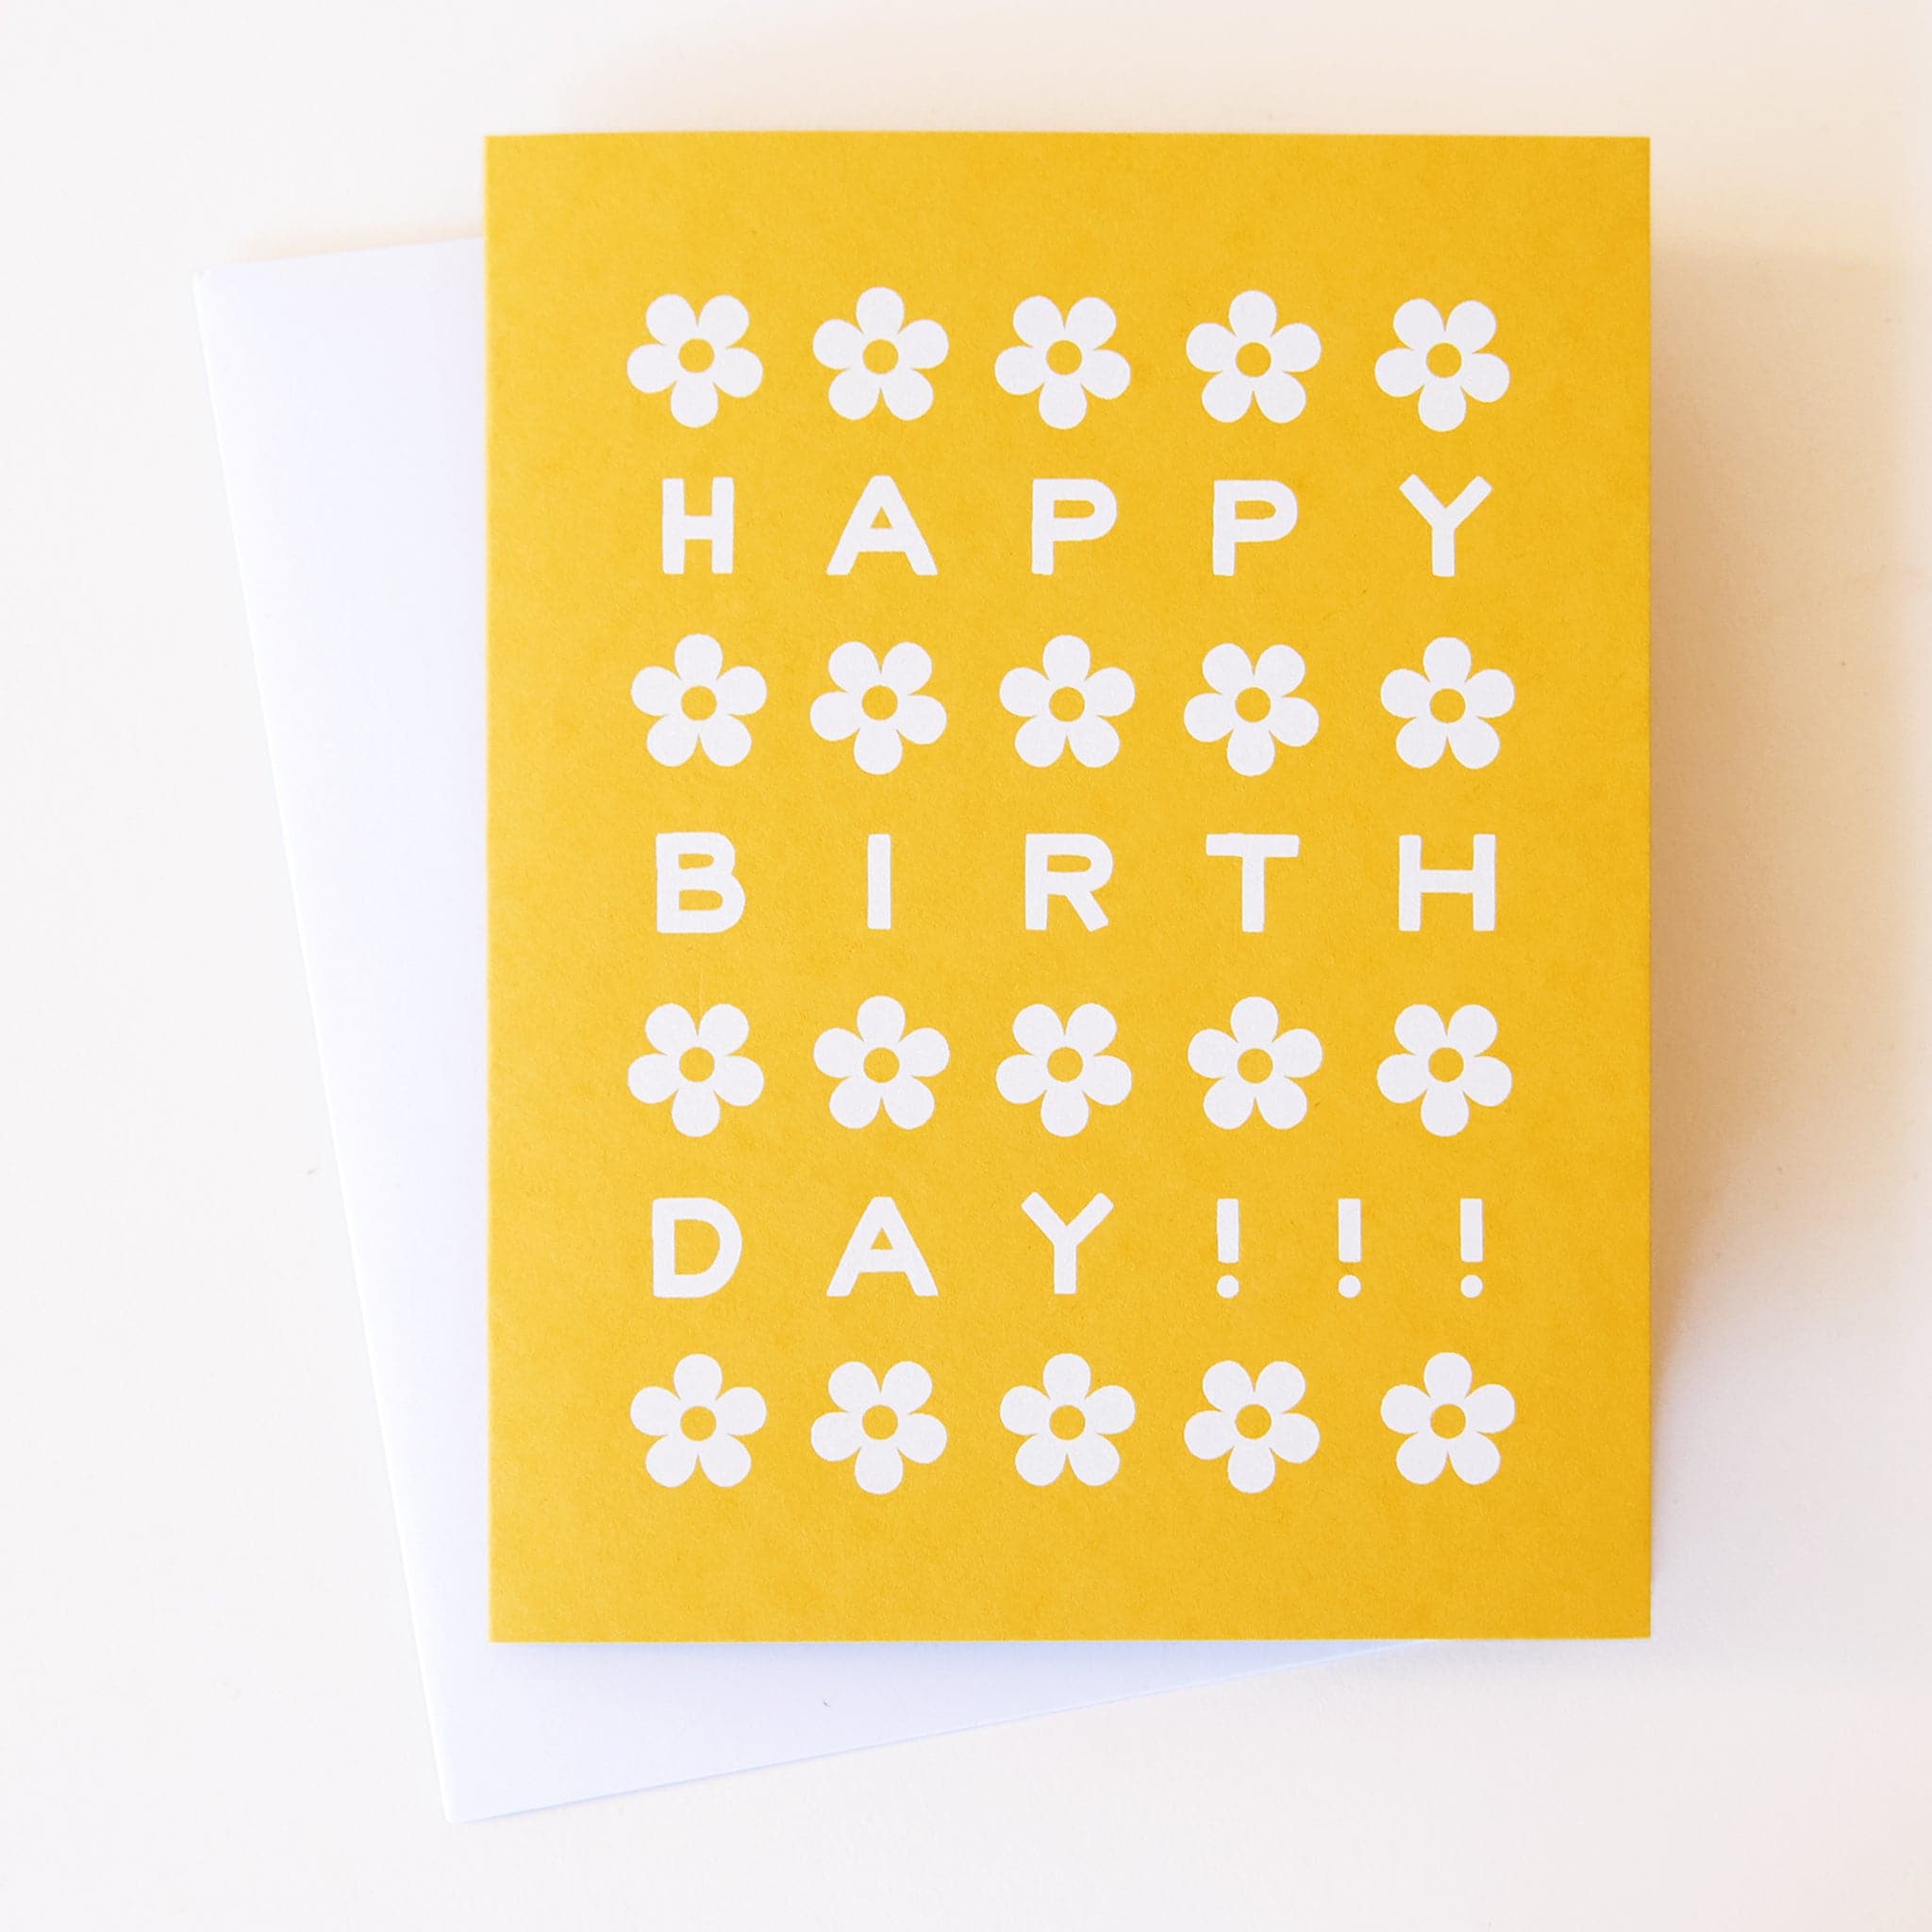 A bright gold card featuring white illustrated daisies and text reading "Happy Birthday!!!" in-between each row of daisies.